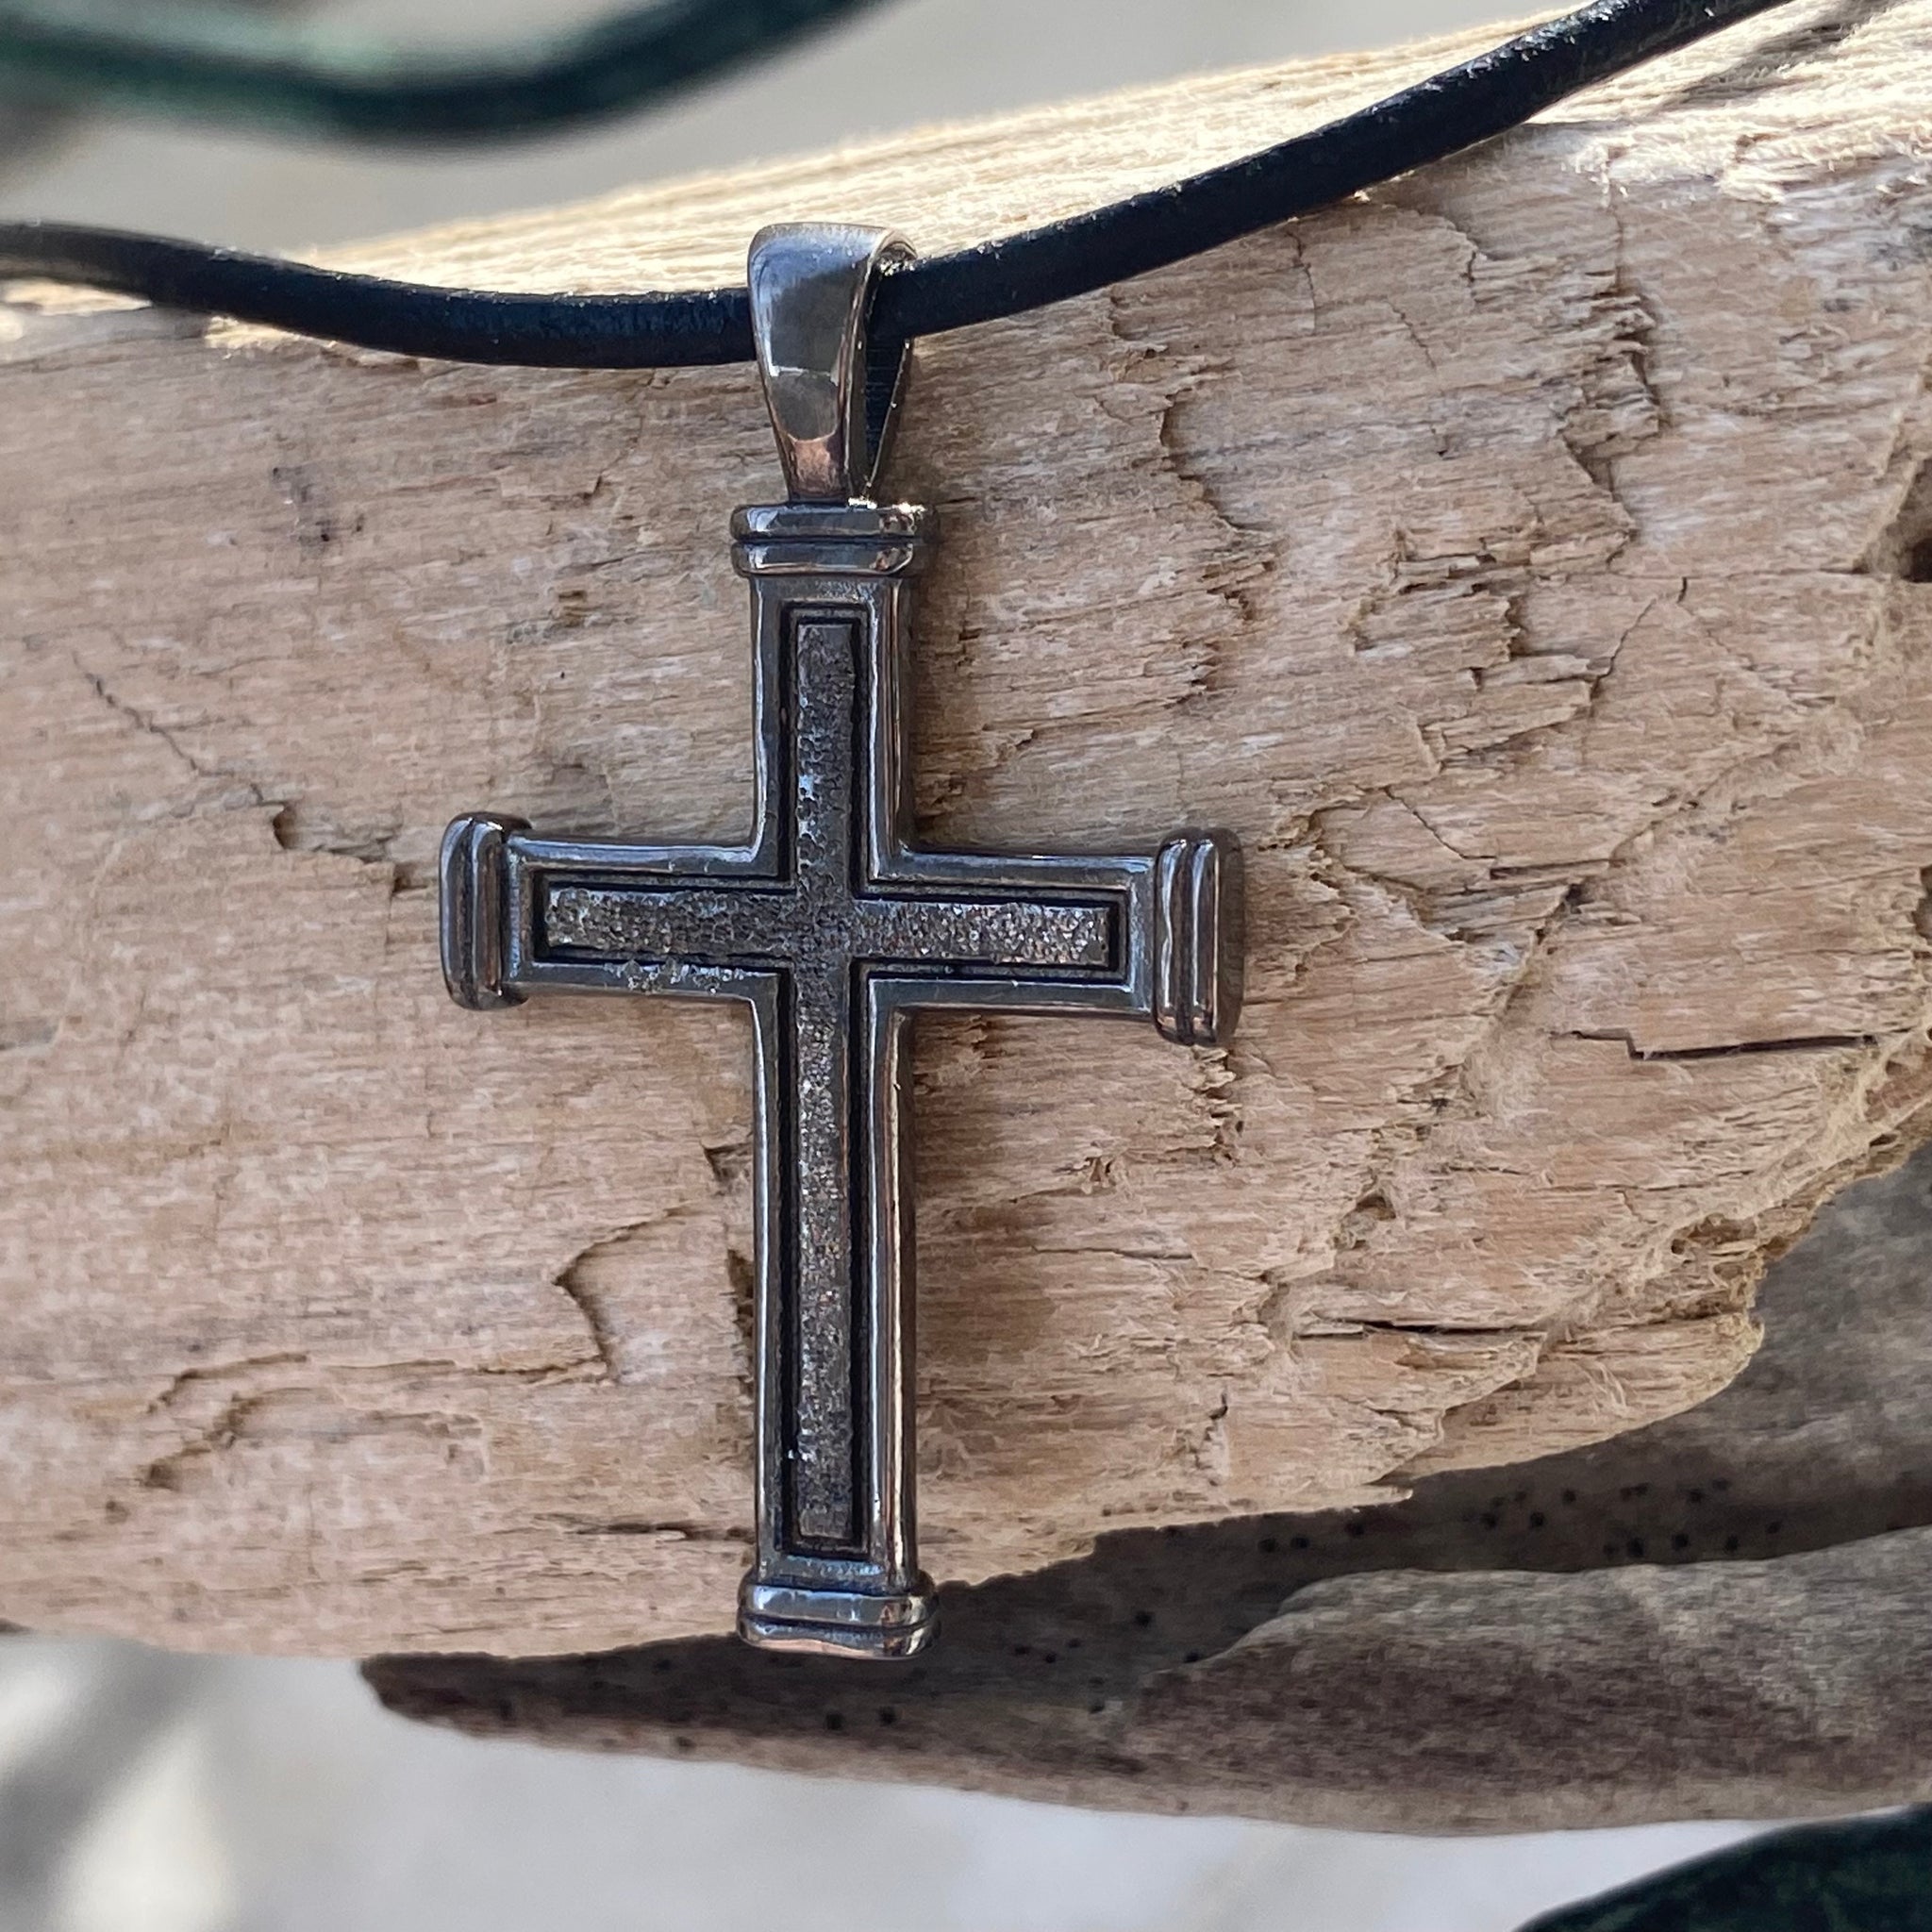 Timeless Cross Necklace for Men and Women | Handmade Vintage Leather Cord Jewelry Black / No Thanks!